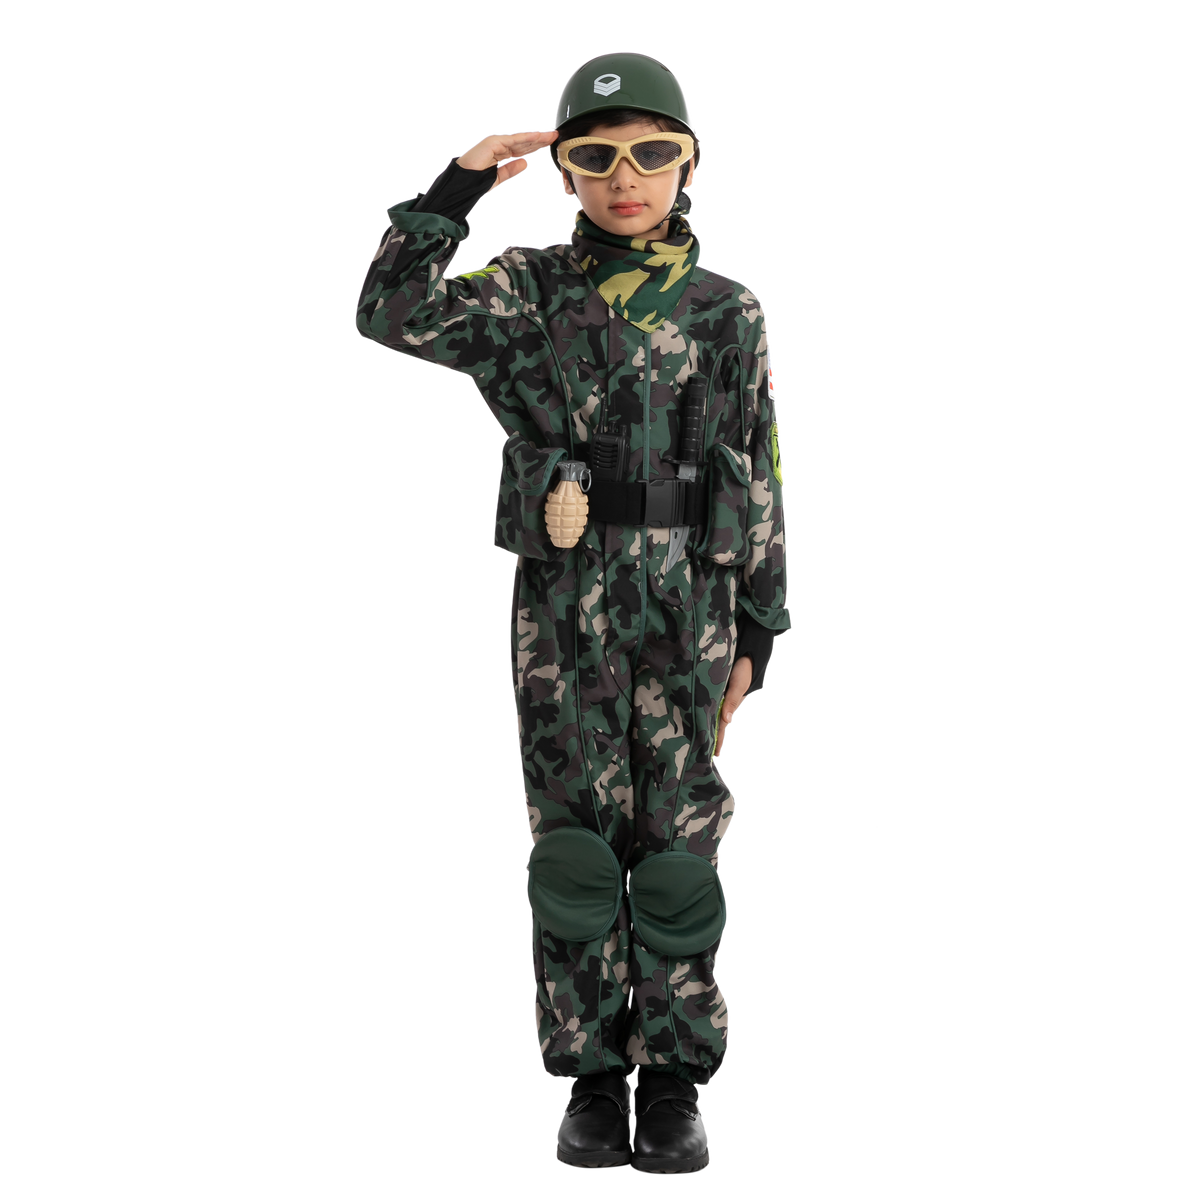 GIFTINBOX Army Costume for Kids, Soldier Halloween Costumes for Boys Kids  3-12, 13PCS Military Costume Dress Up Role Play Set with Army Accessories,  Deluxe Halloween Birthday Gift for Kids Size M 